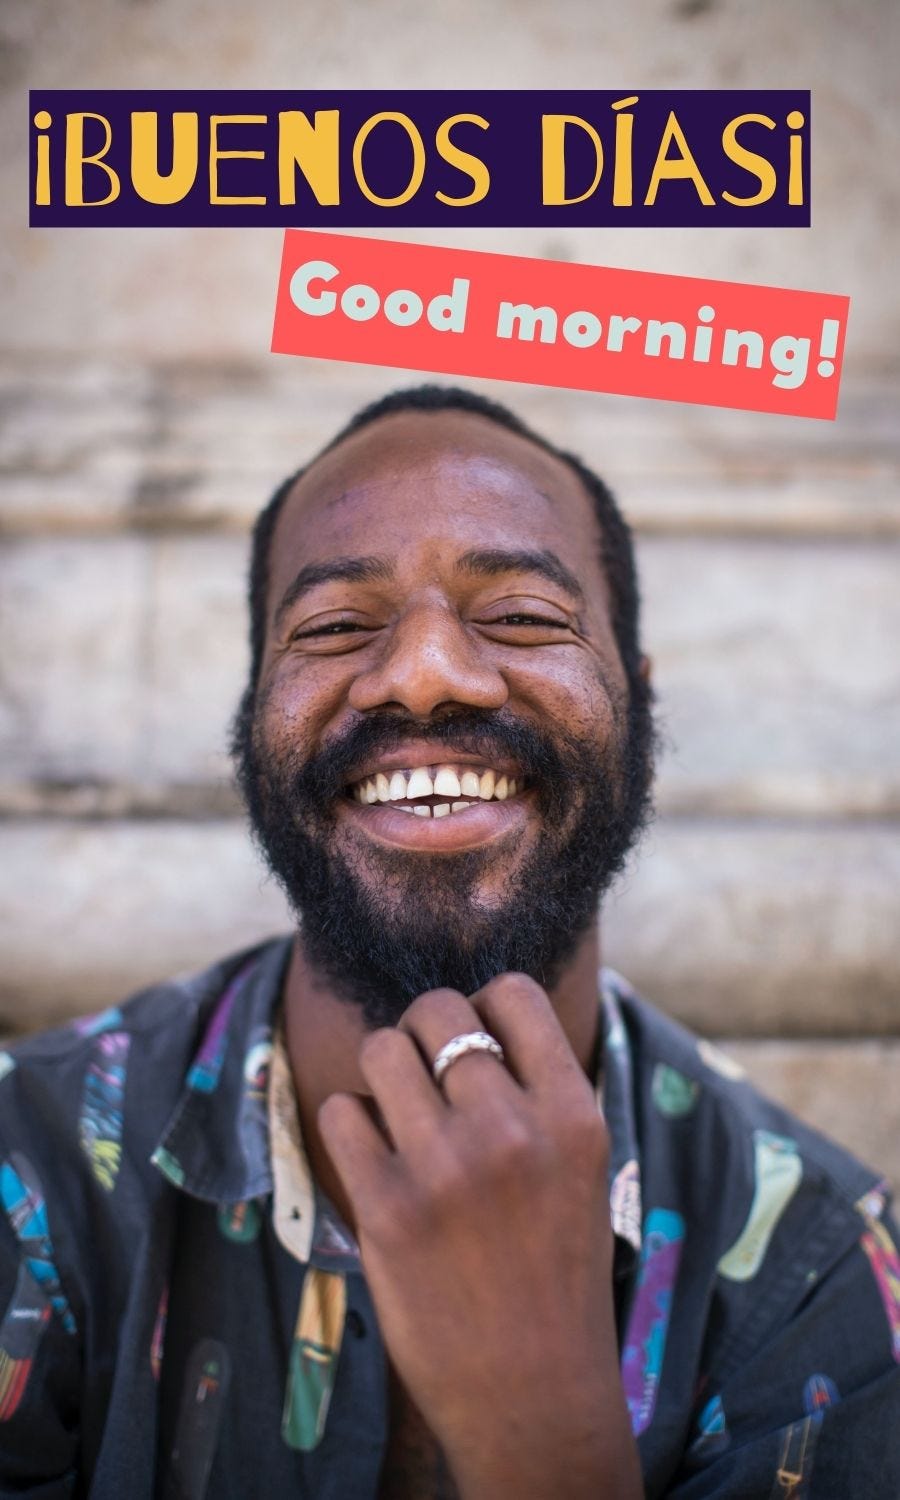 Black man smiling with words buenos dias and good morning